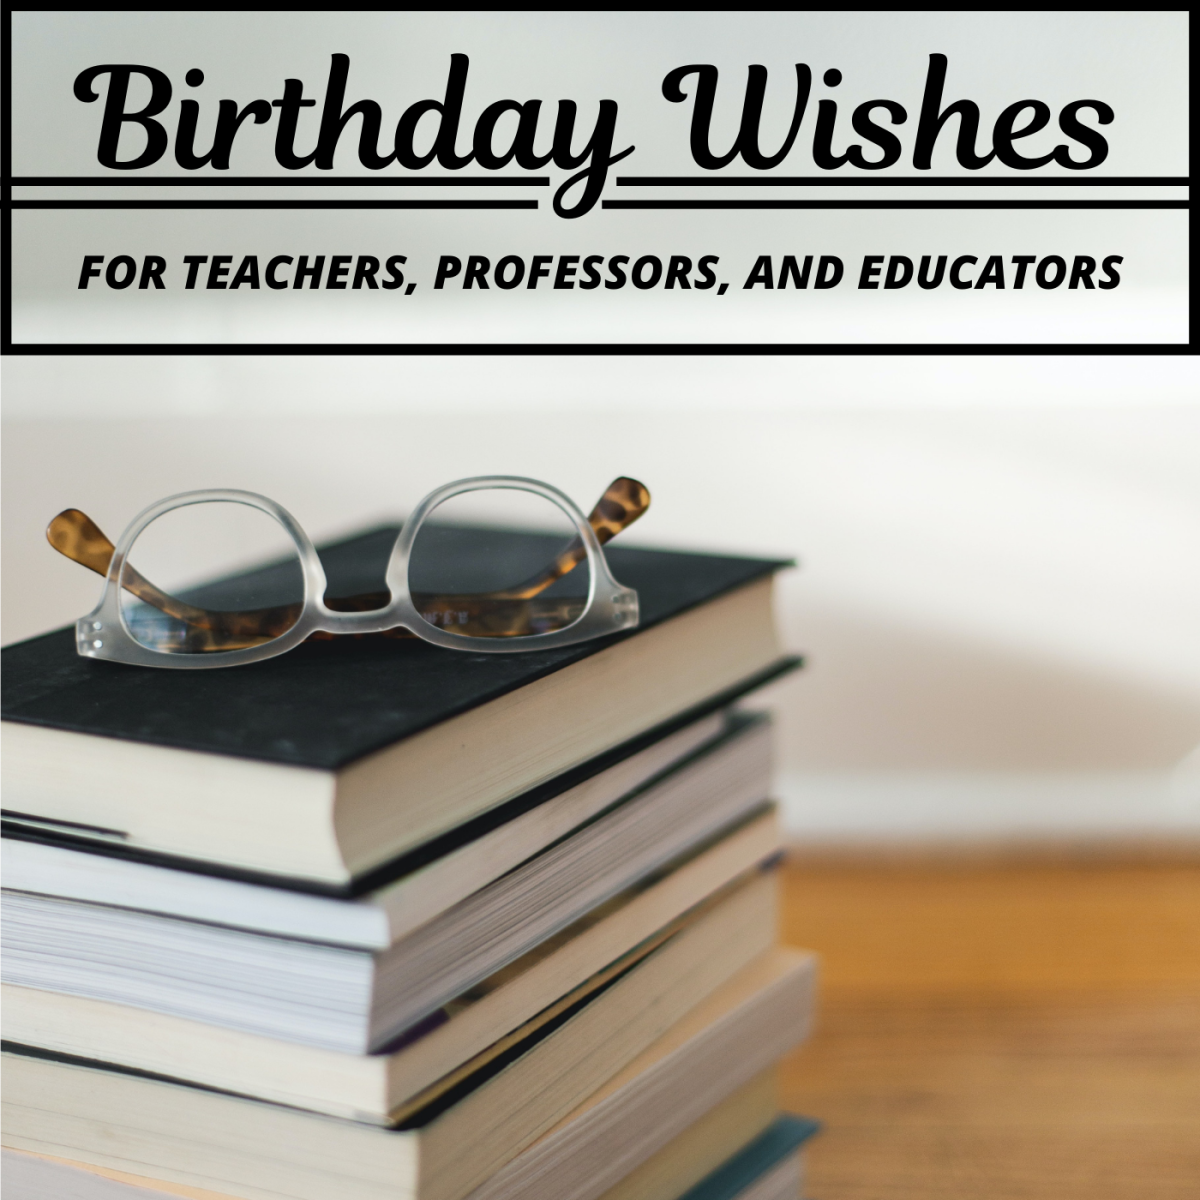 Our teachers give us the tools we need to grow and succeed. Why not let them know how much their work means to us by giving them a birthday card with a thoughtful message?